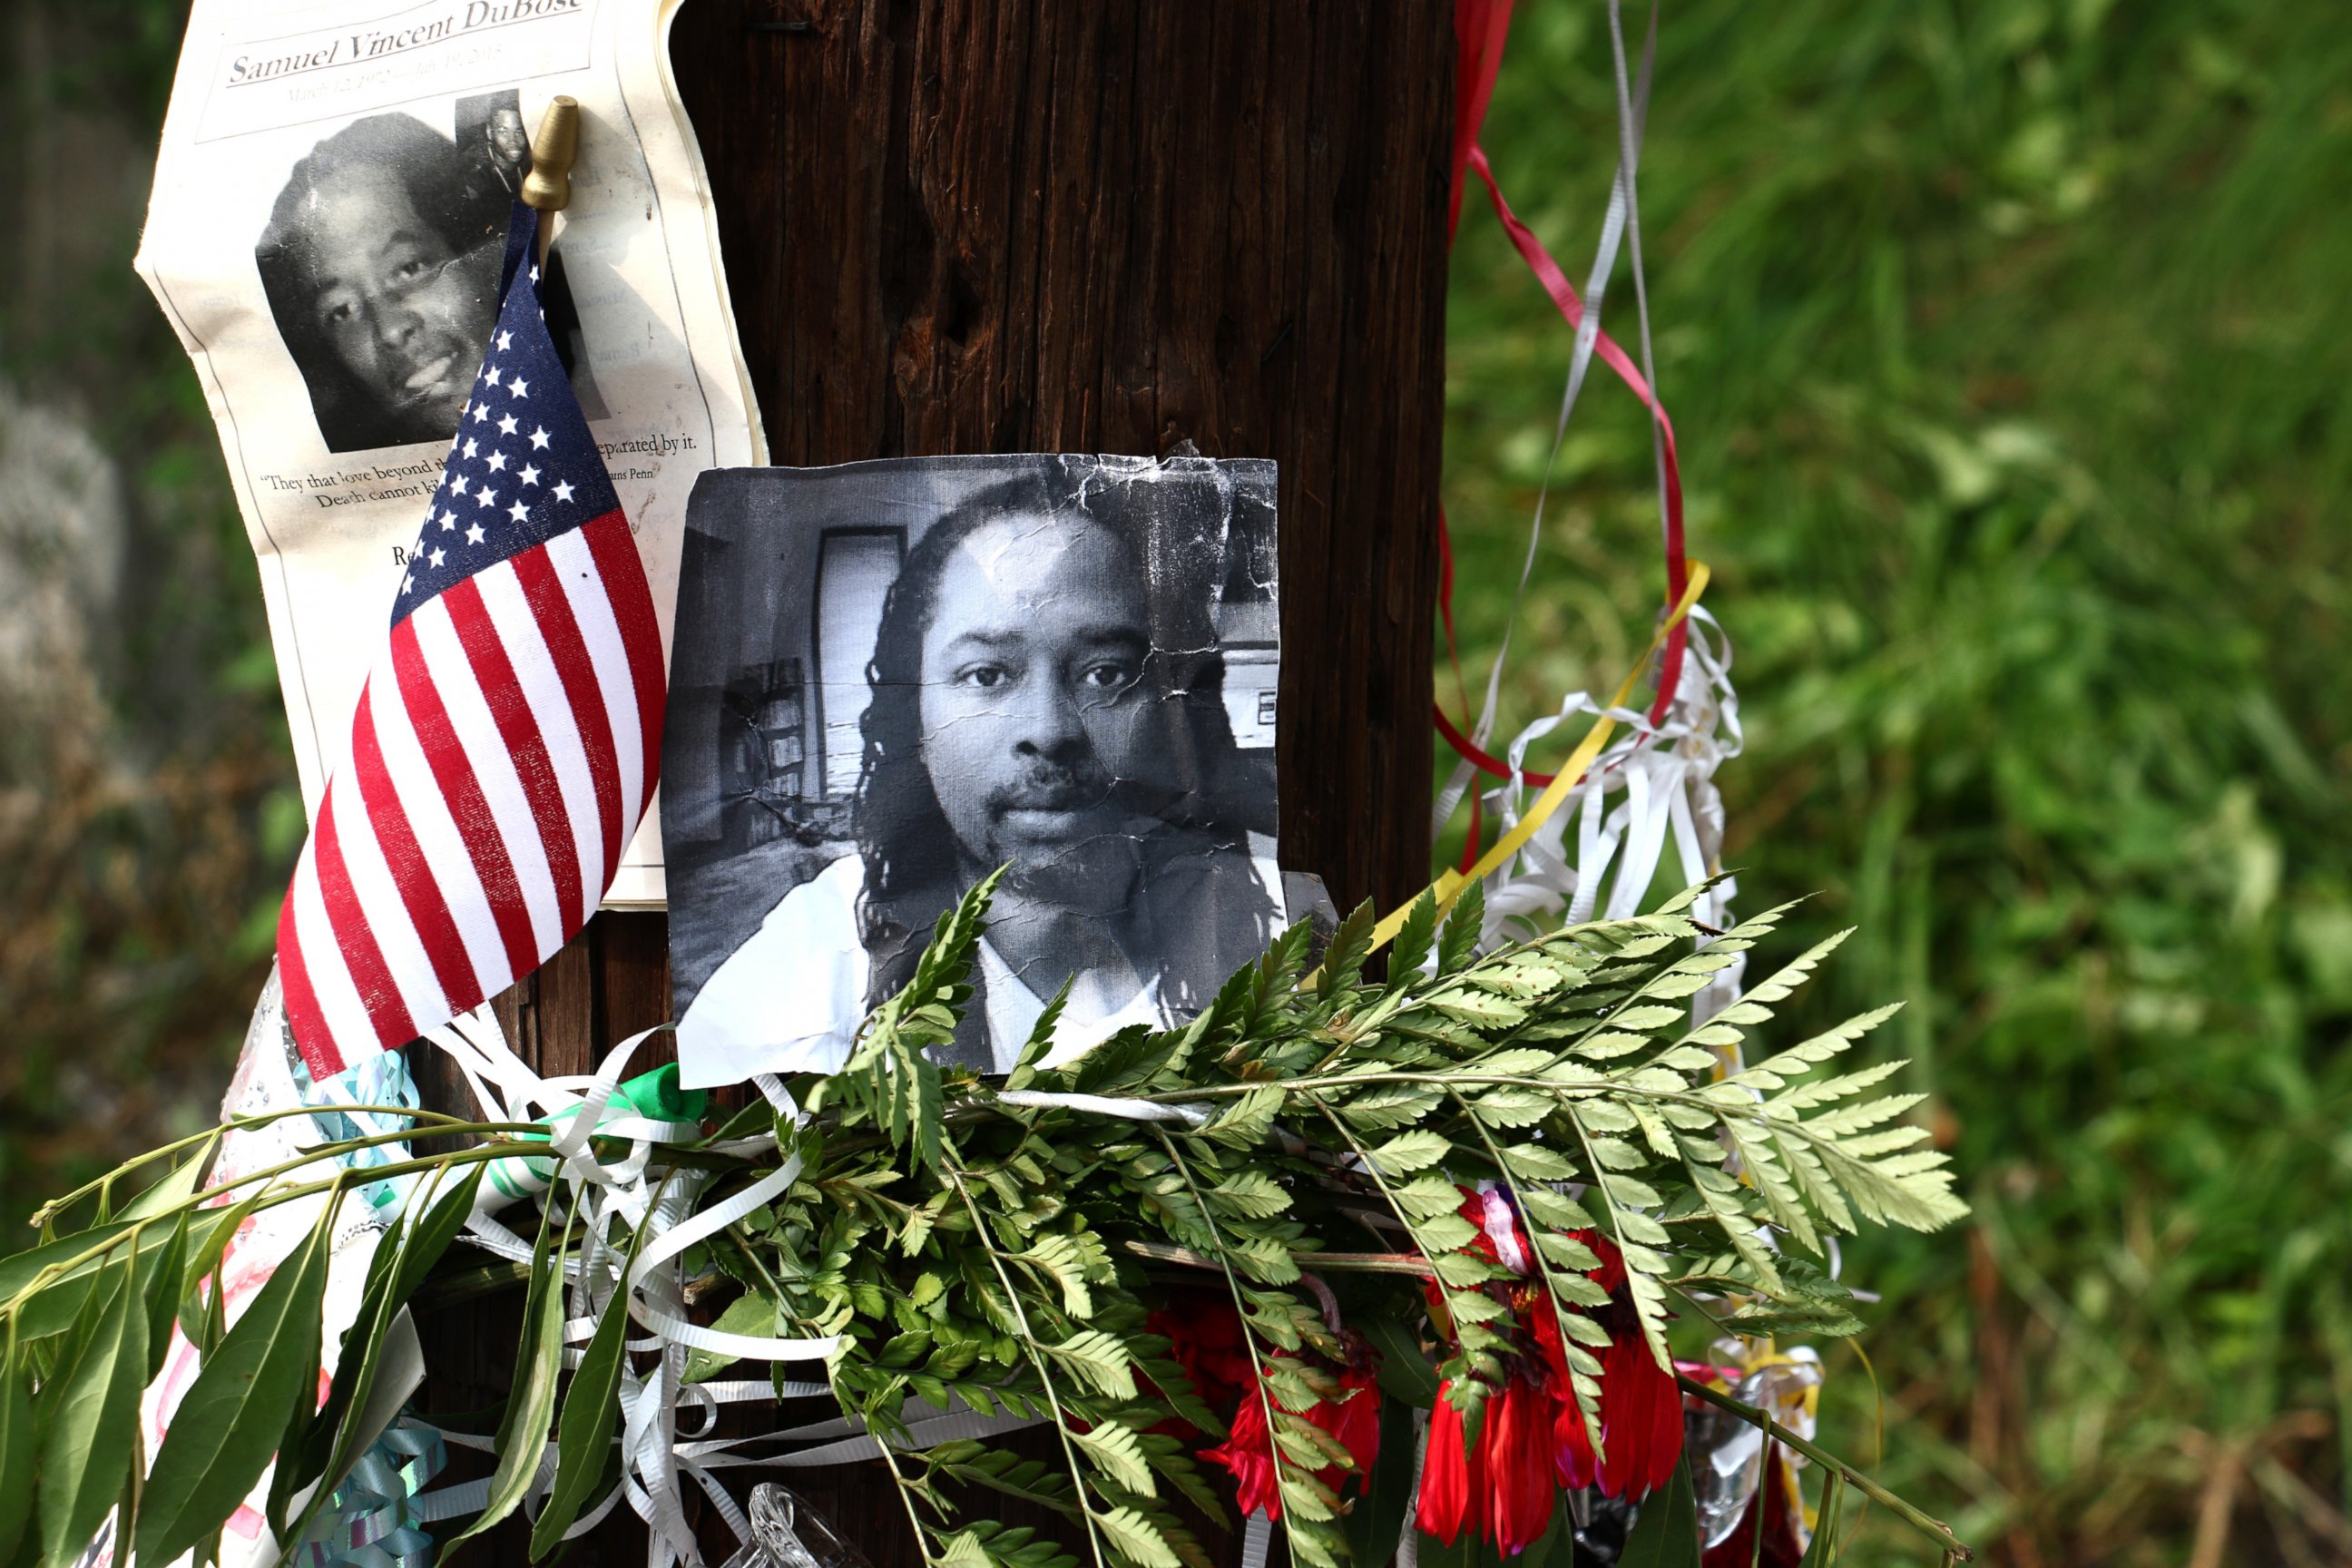 Photos of Samuel DuBose hang on a pole at a memorial, July 29, 2015, in Cincinnati, near where he was shot and killed by a police office. Murder and manslaughter charges were announced against Ray Tensing for the shooting death of DuBose. 